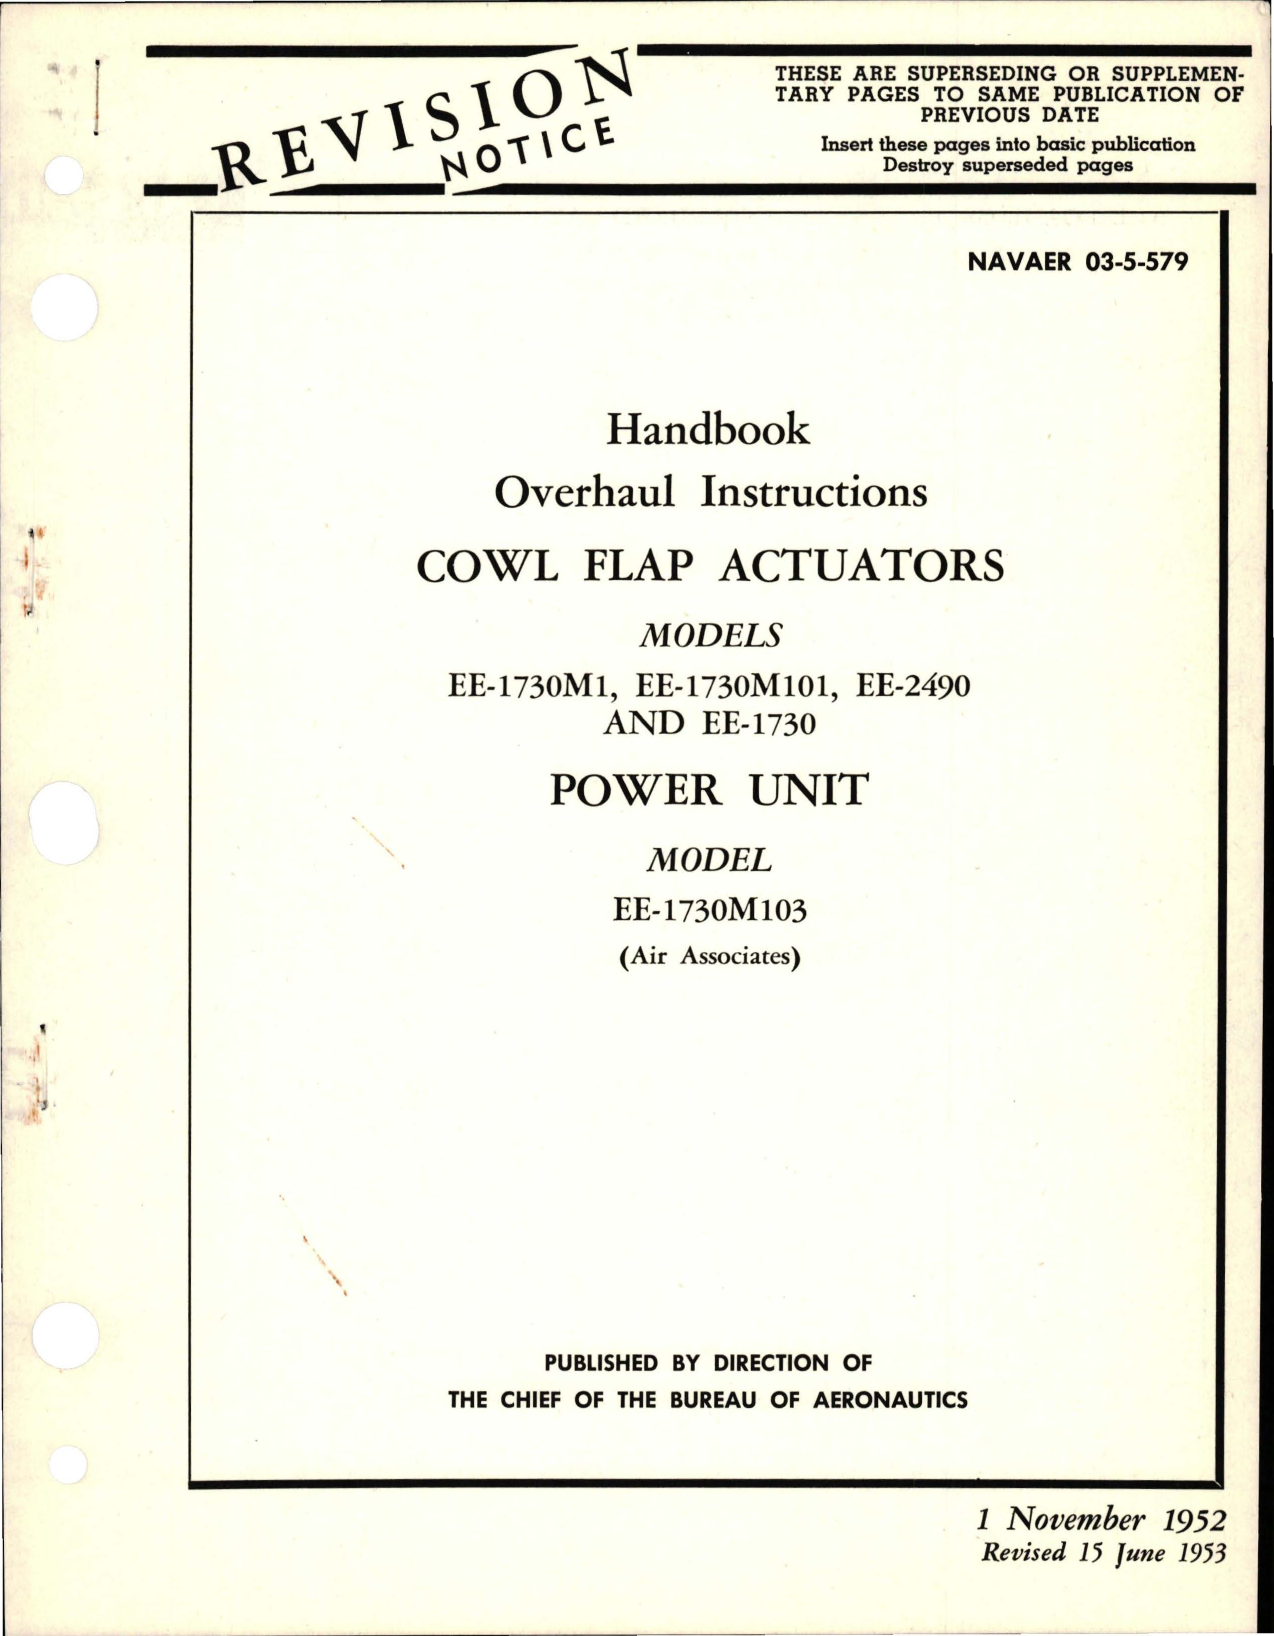 Sample page 1 from AirCorps Library document: Overhaul Instructions for Cowl Flap Actuators and Power Unit 